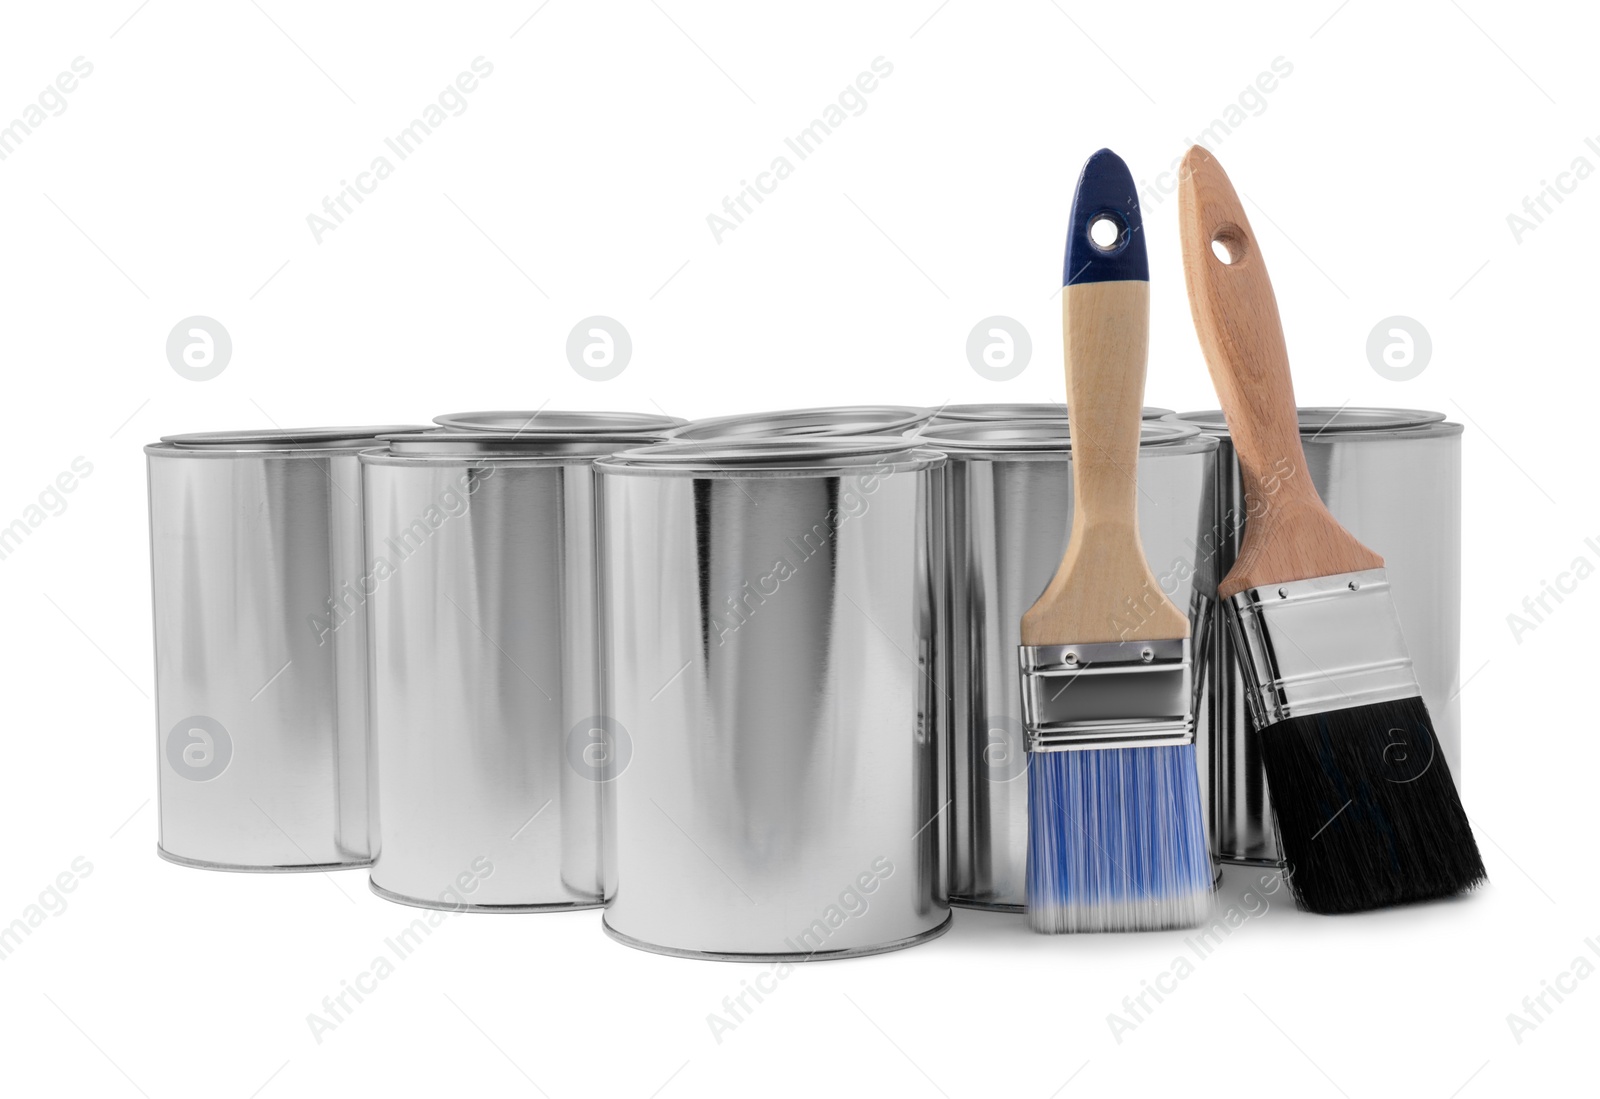 Photo of Cans of paints and brushes on white background